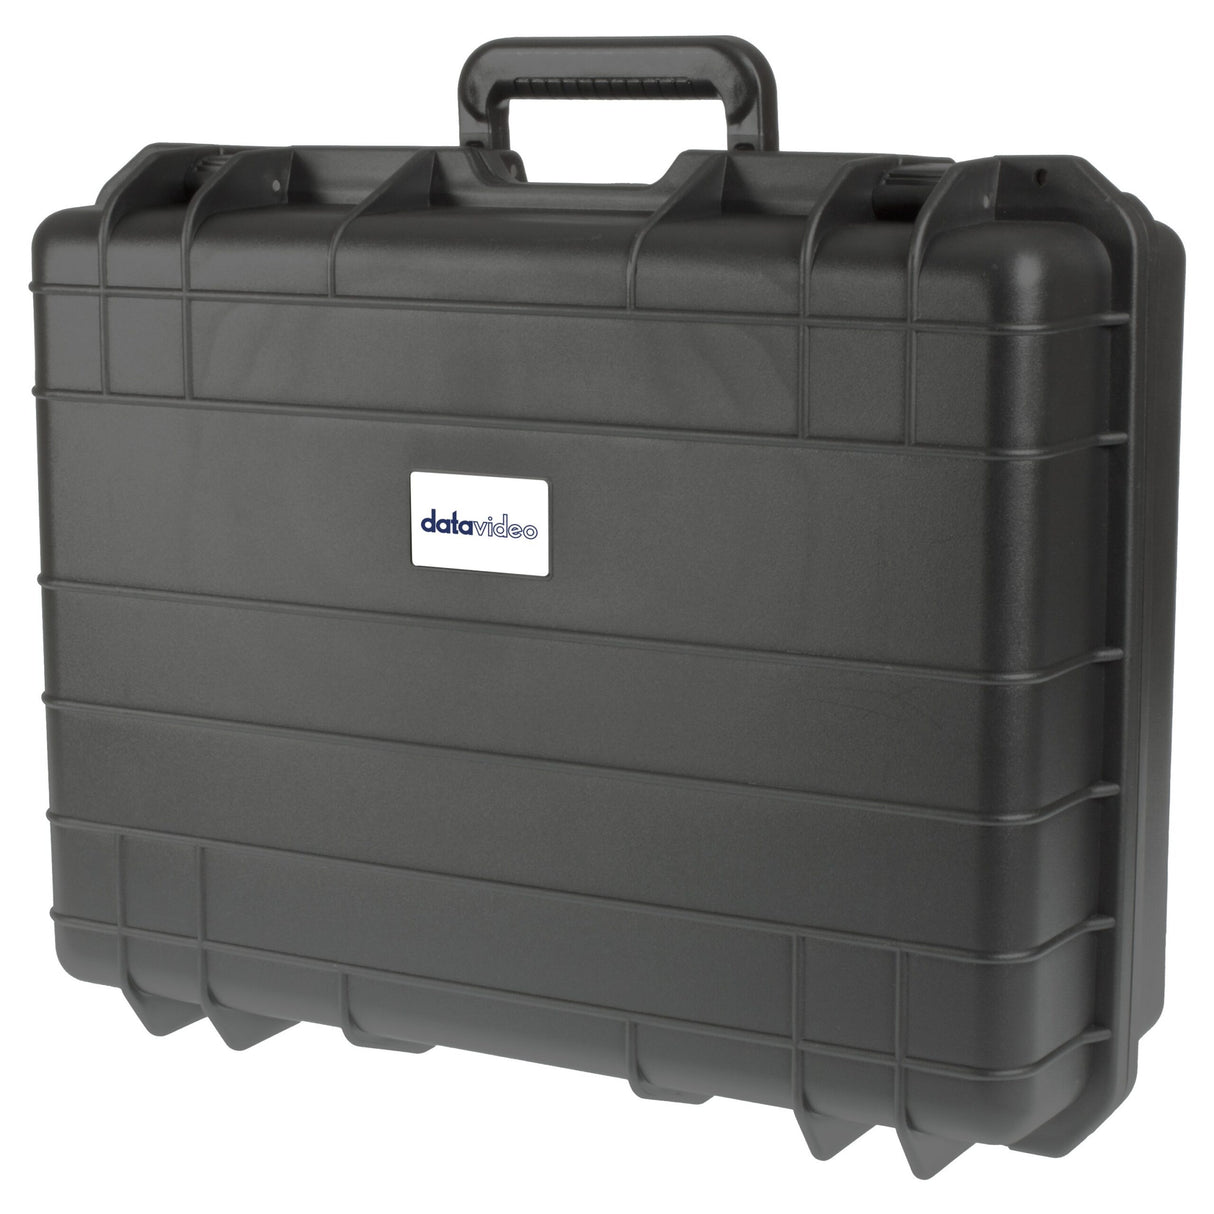 Datavideo HC-600 Carry Case for TP-650 or HRS-30